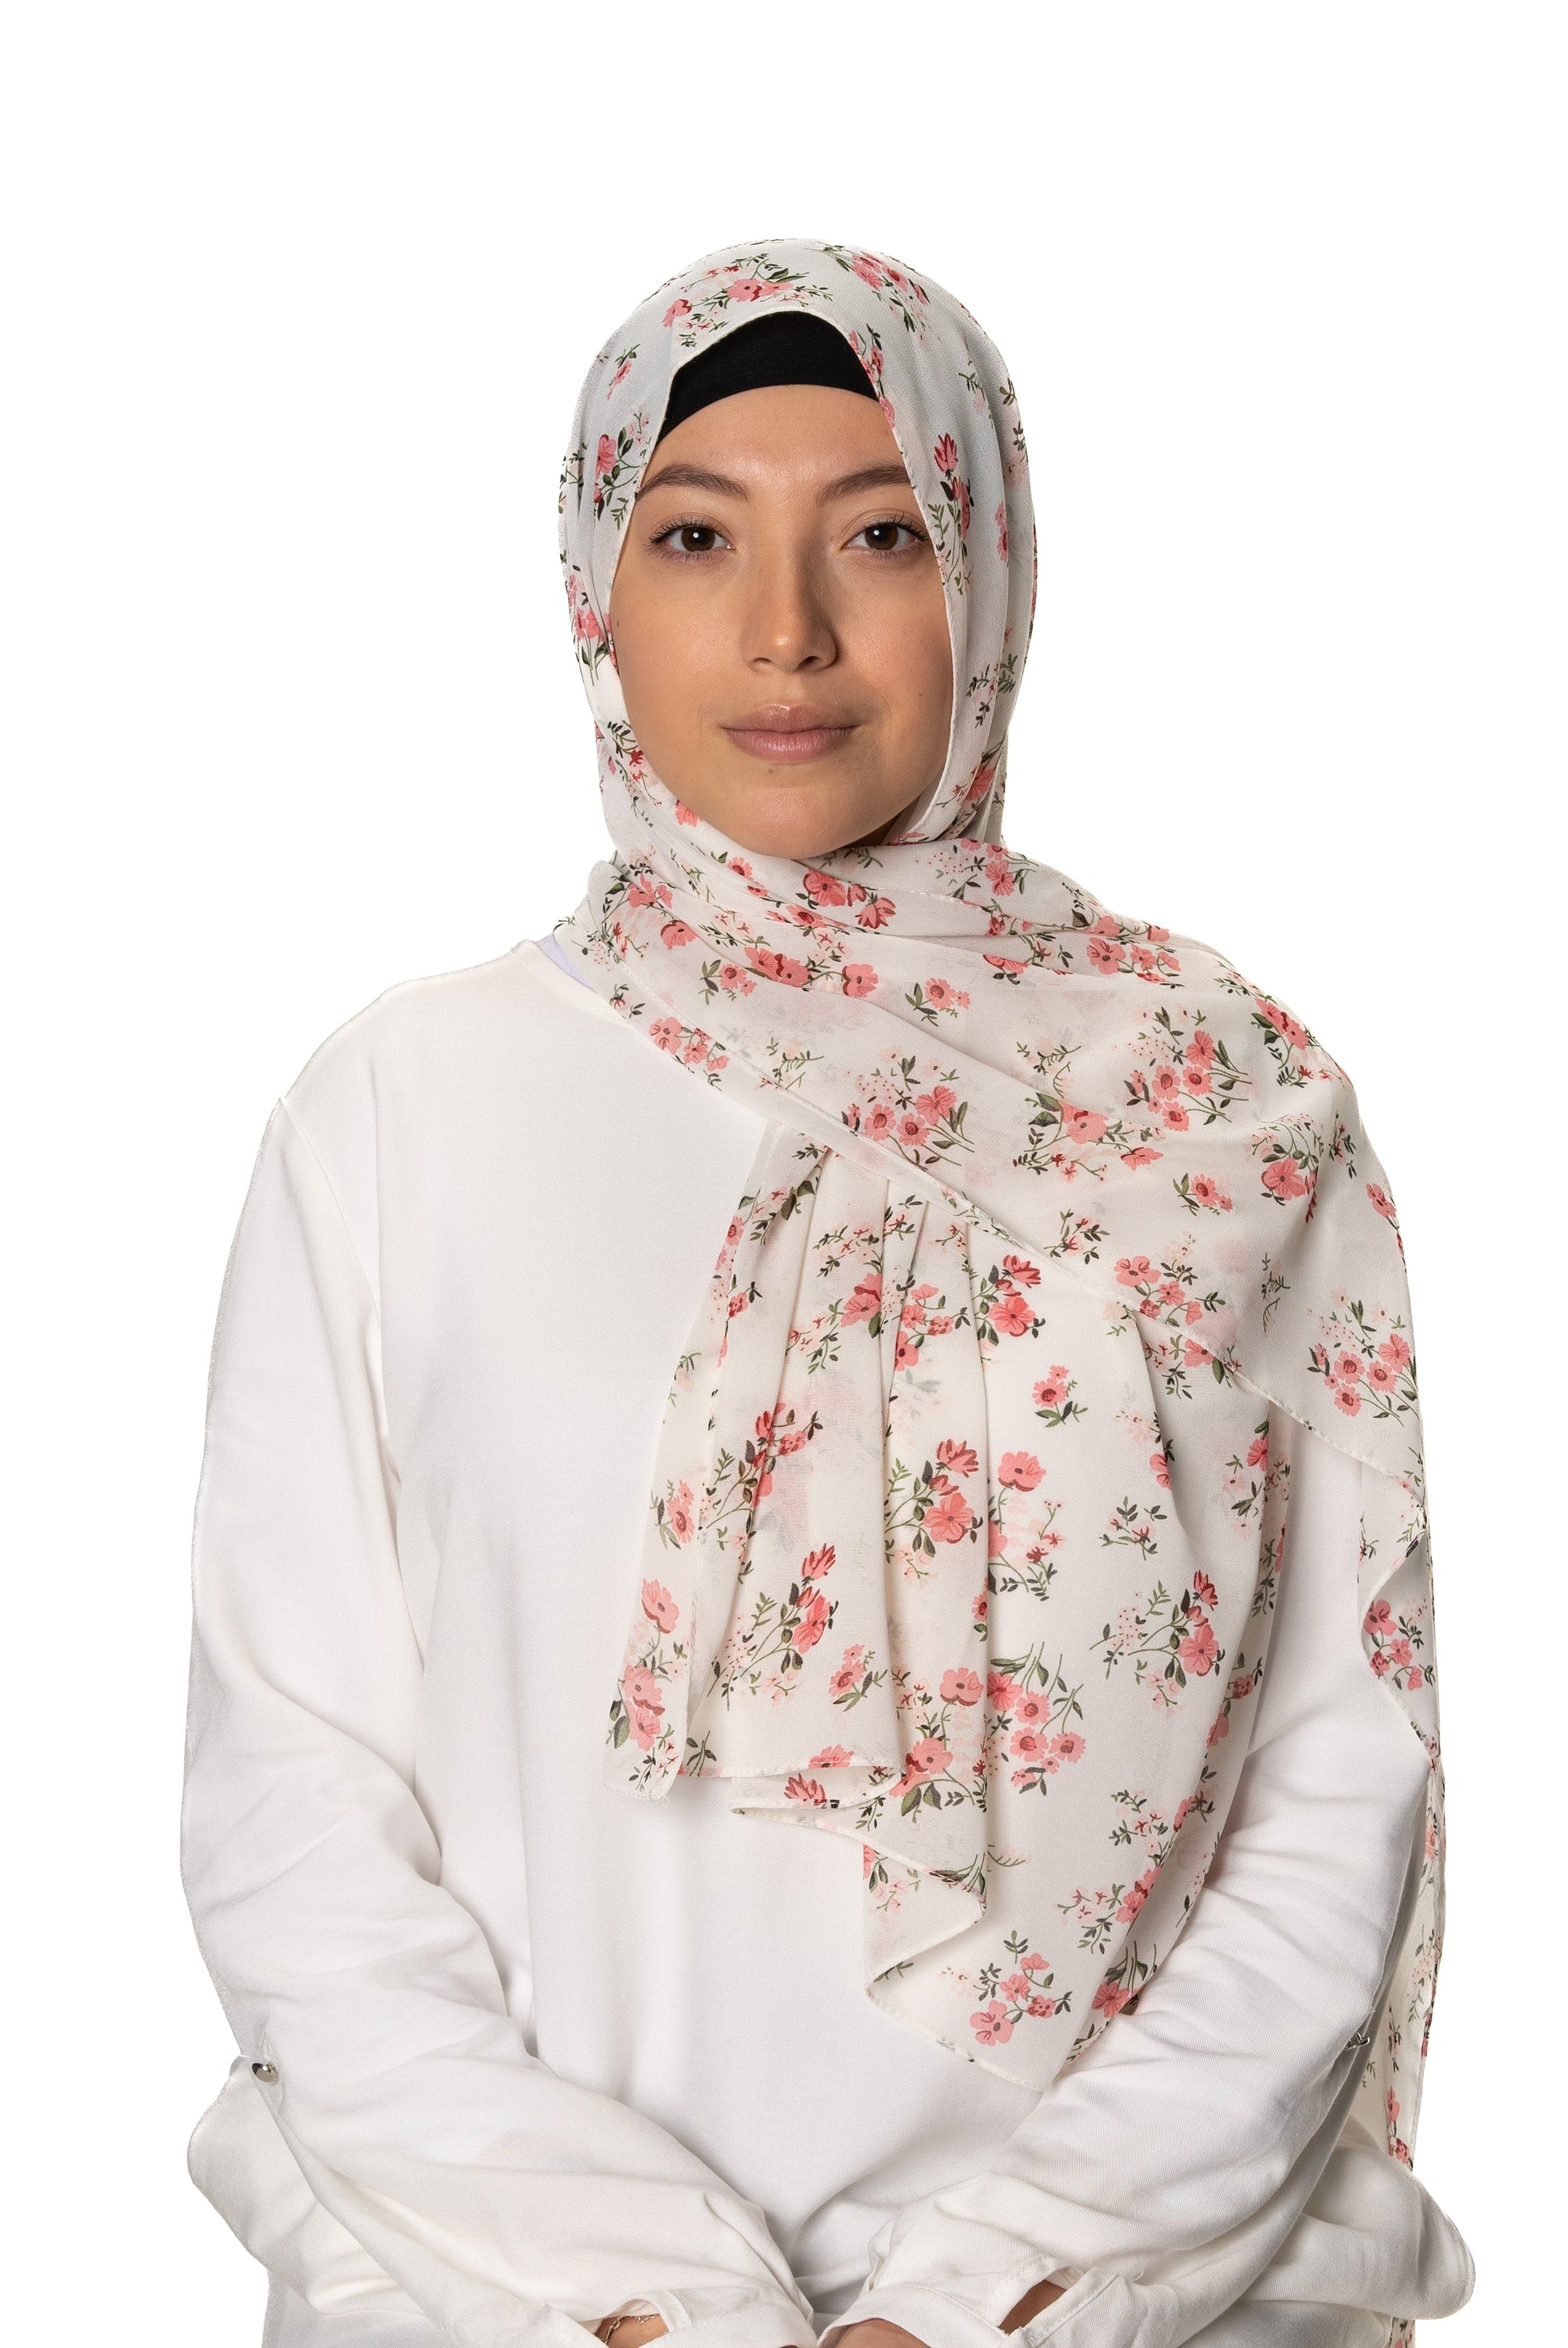 Jolie Nisa Hijab Ivory Blossom Elevate Your Style with Jolie Nisa Non-Slip Printed Chiffon Hijabs - Elegant, Comfortable, and Secure Hijabs for Women